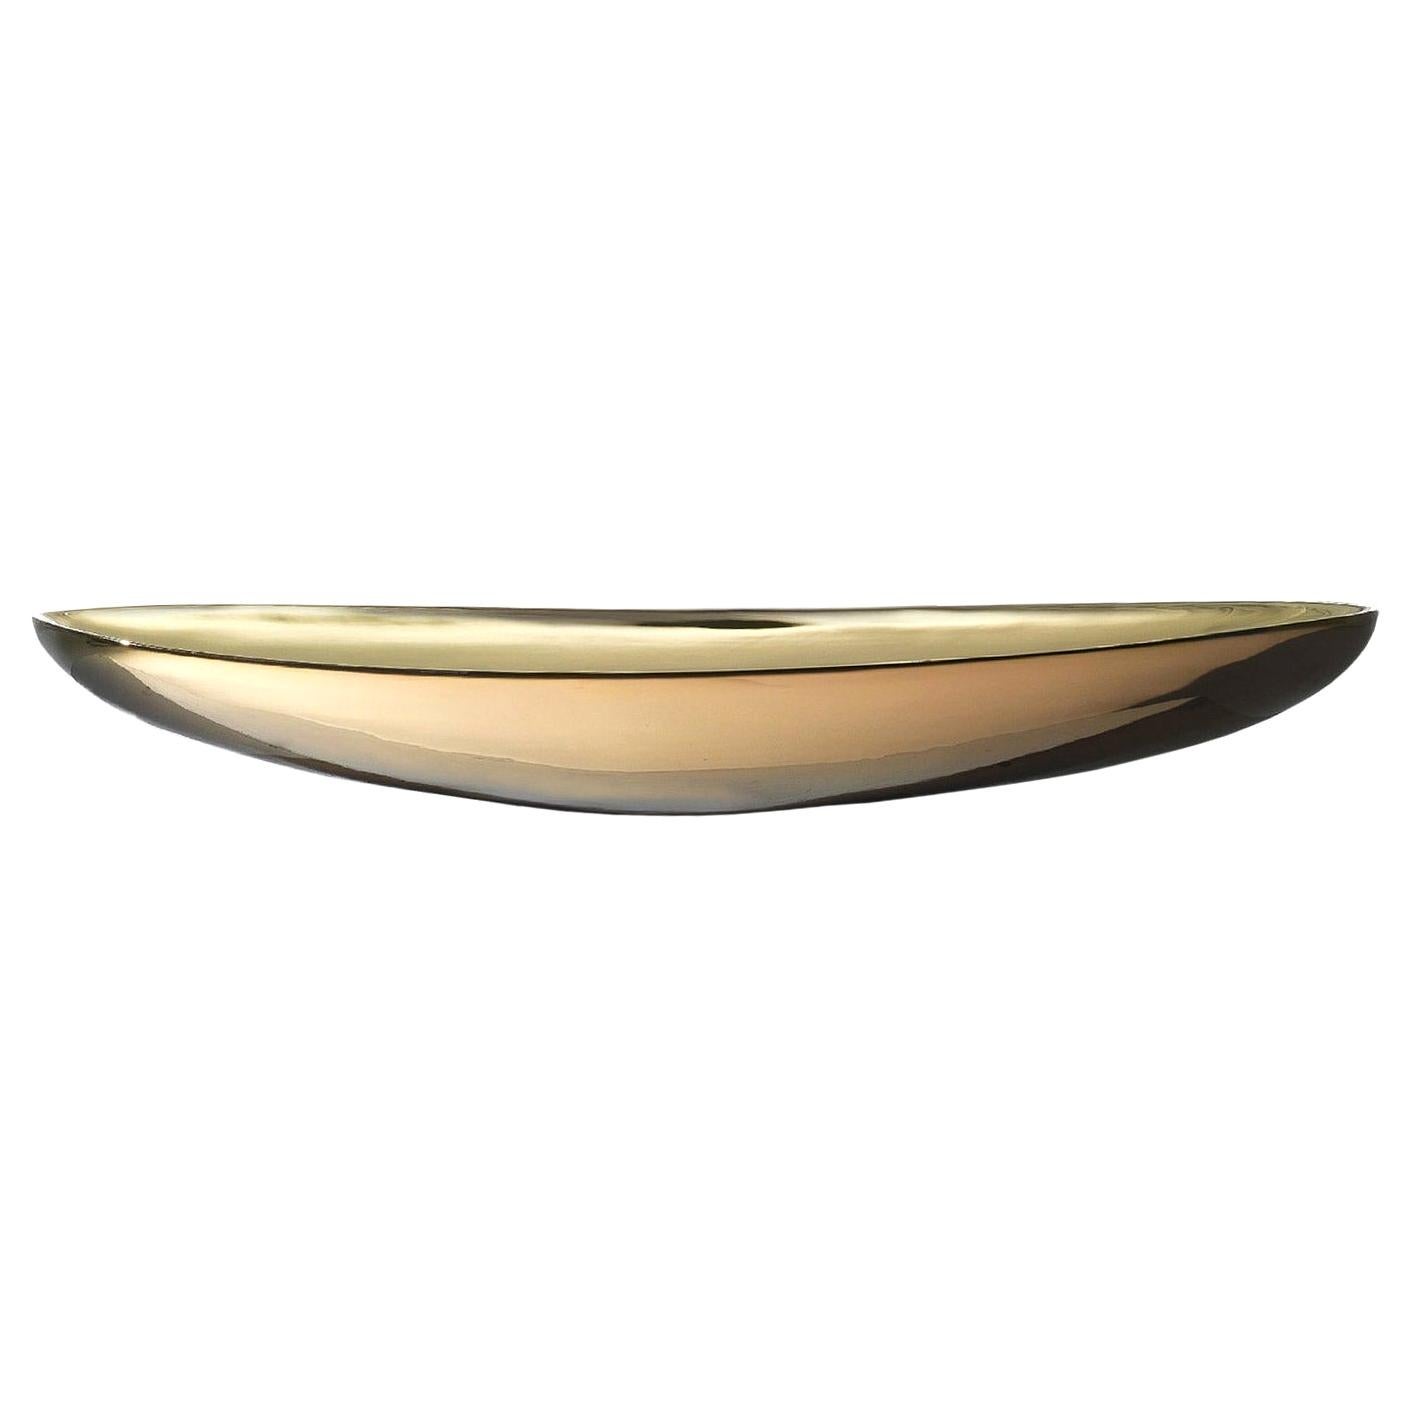 Ceramic Oval Plate "COSMOS" Handcrafted in Bronze and 24kt Gold by Gabriella B.